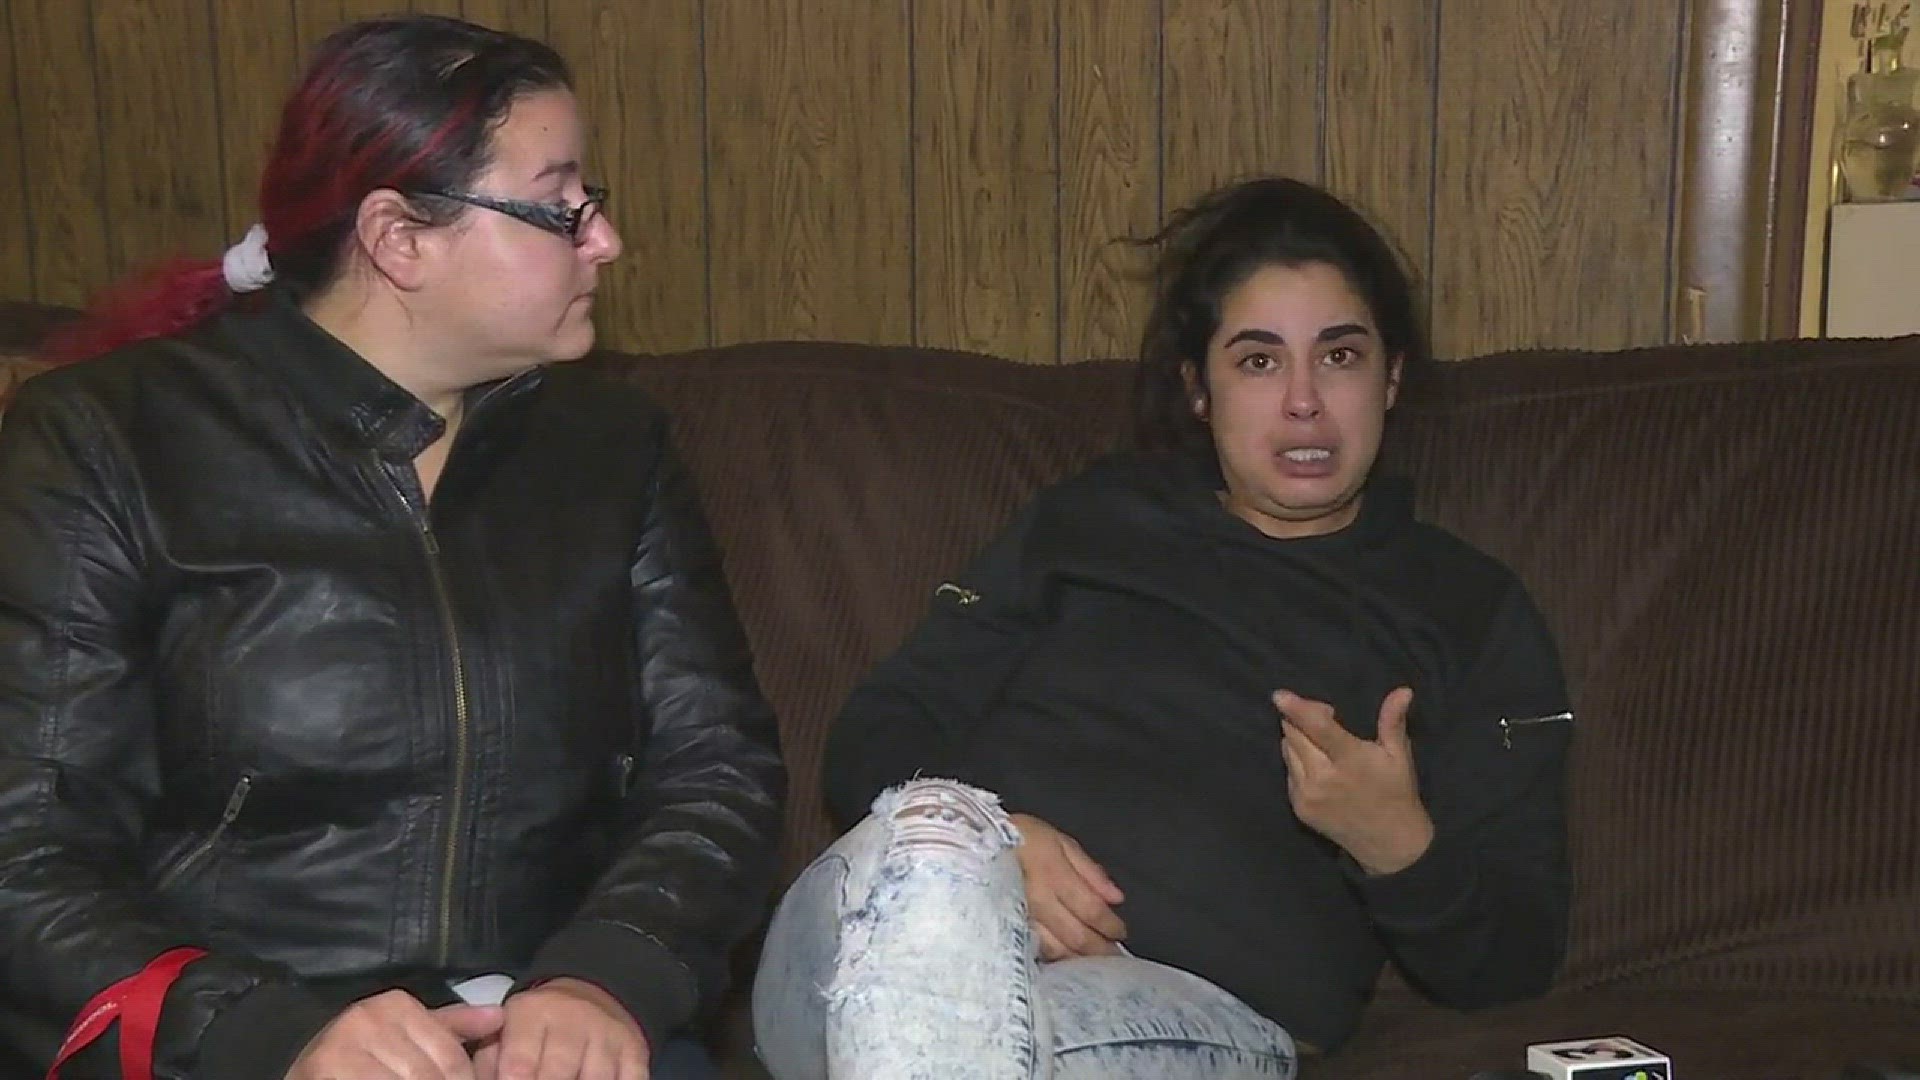 The family of Larissa Rodriguez, whose 5-year-old son is missing as human remains were found in her yard, spoke with WKYC in an emotional interview.